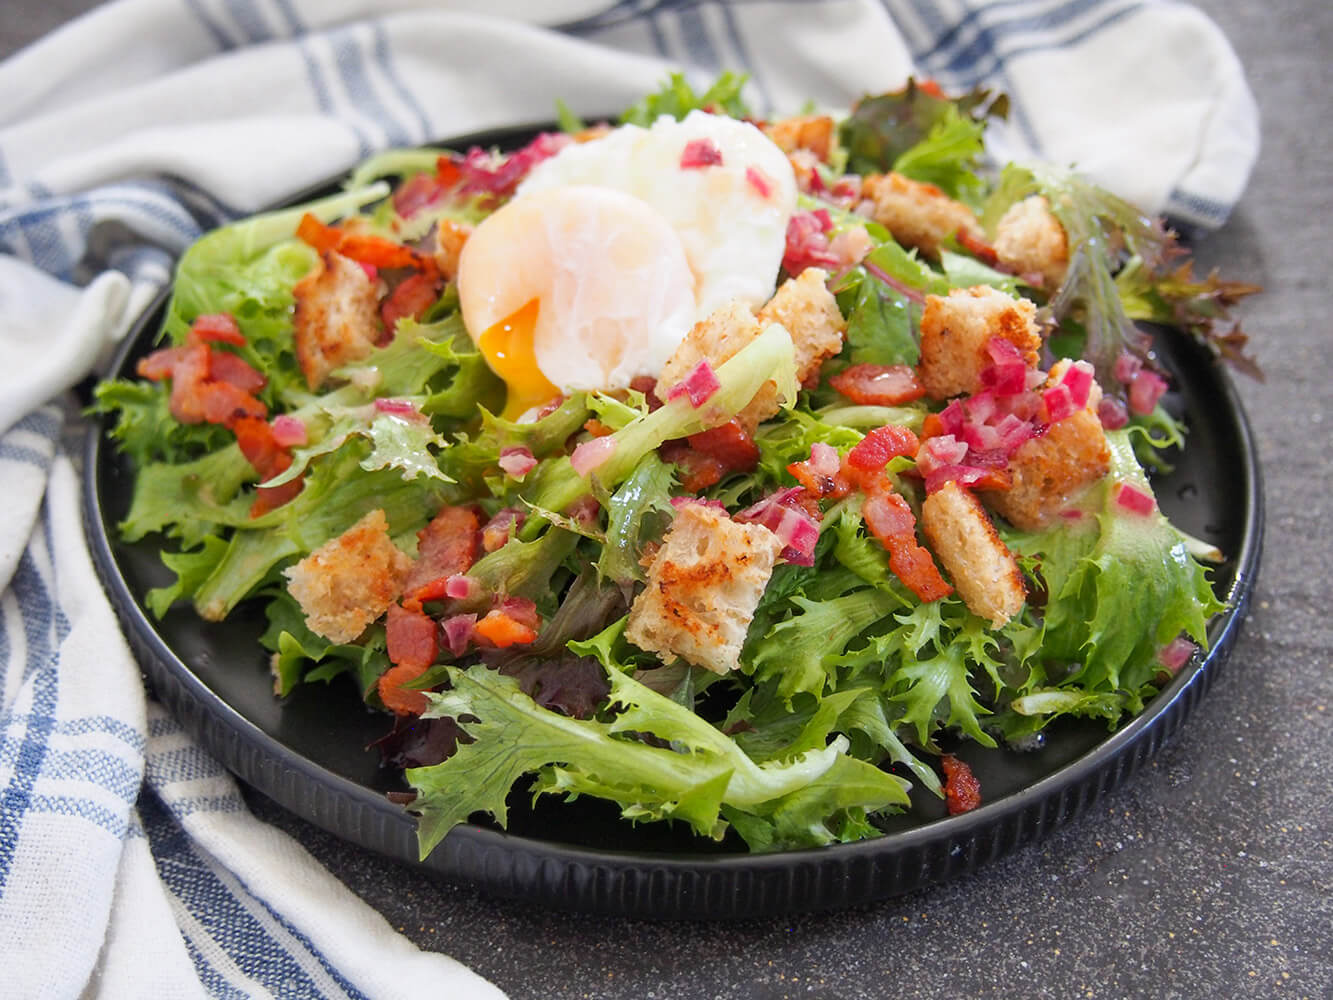 salade Lyonnaise - a simple green salad with bacon and egg on top